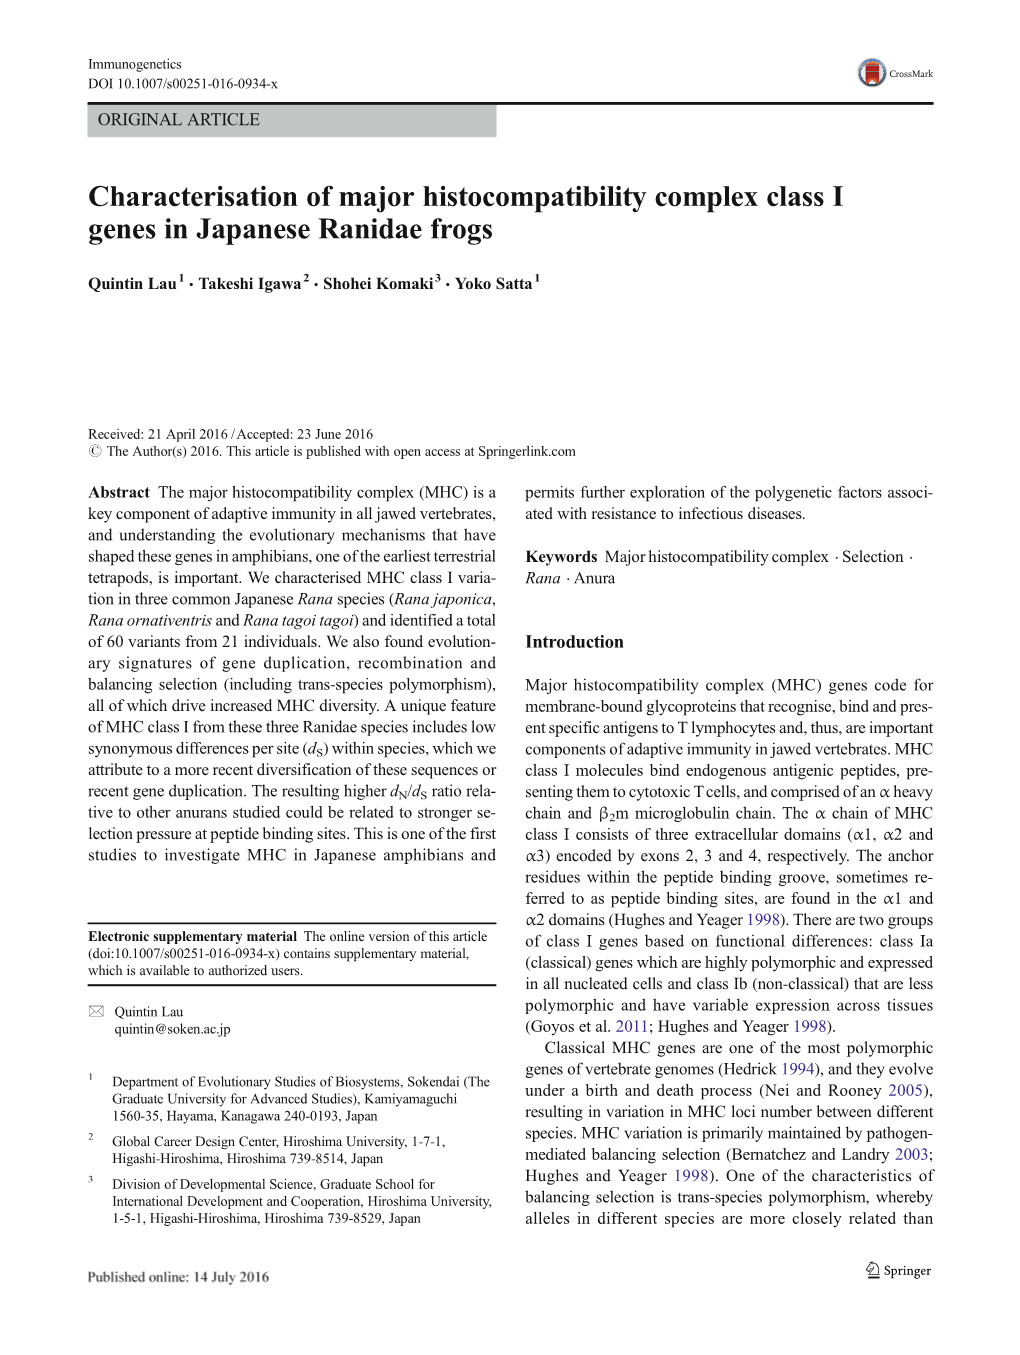 Characterisation of Major Histocompatibility Complex Class I Genes in Japanese Ranidae Frogs